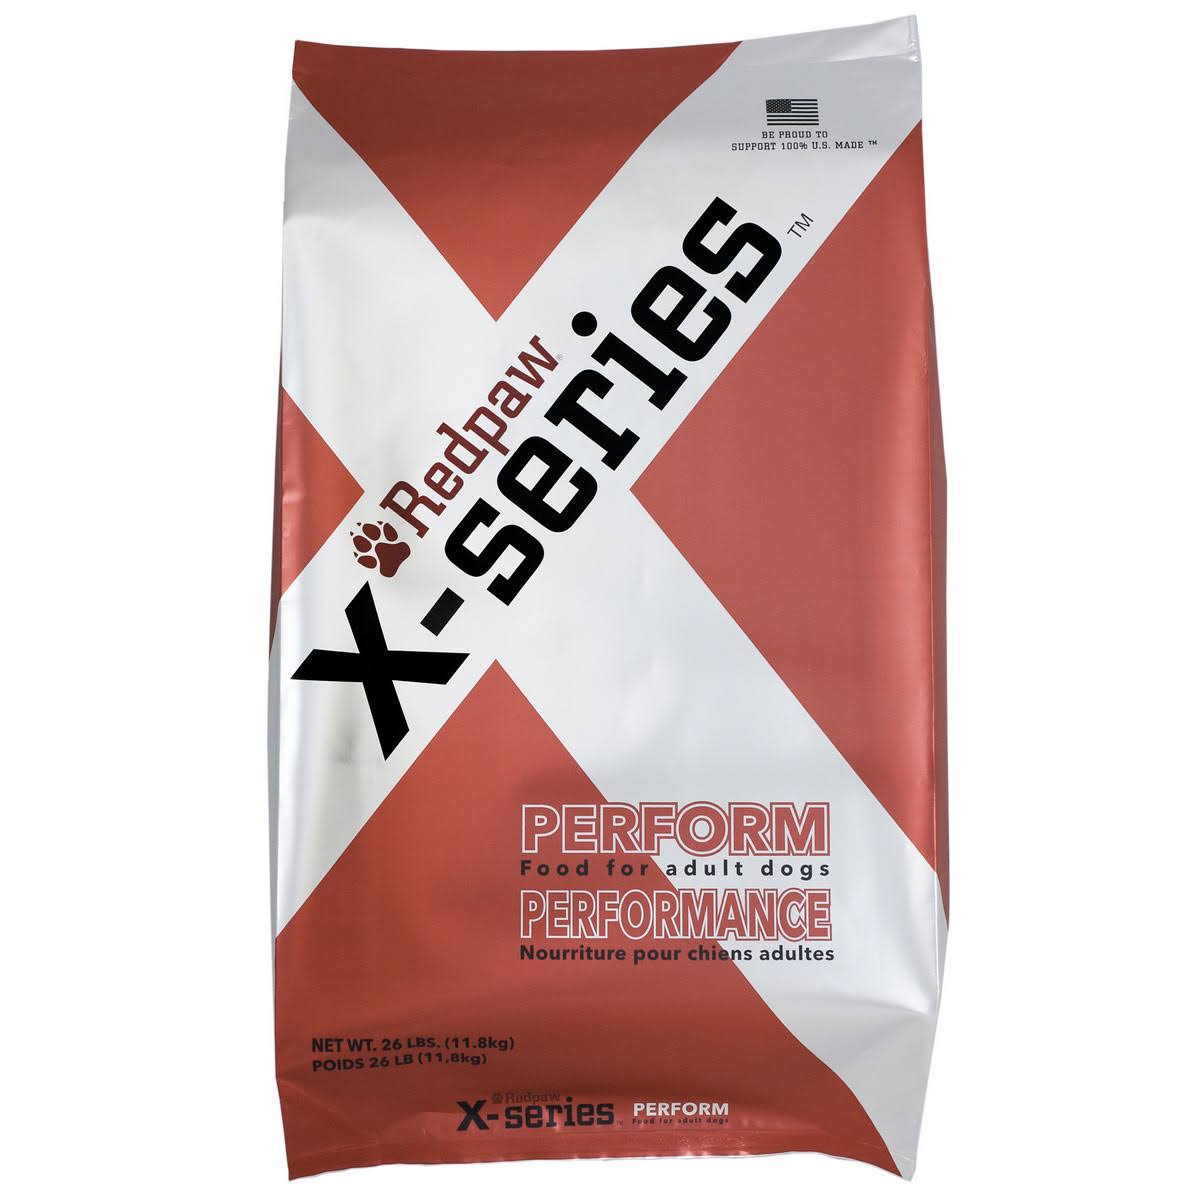 Redpaw X-Series Perform 3 Dog Food for Canine Fitness - 26lb